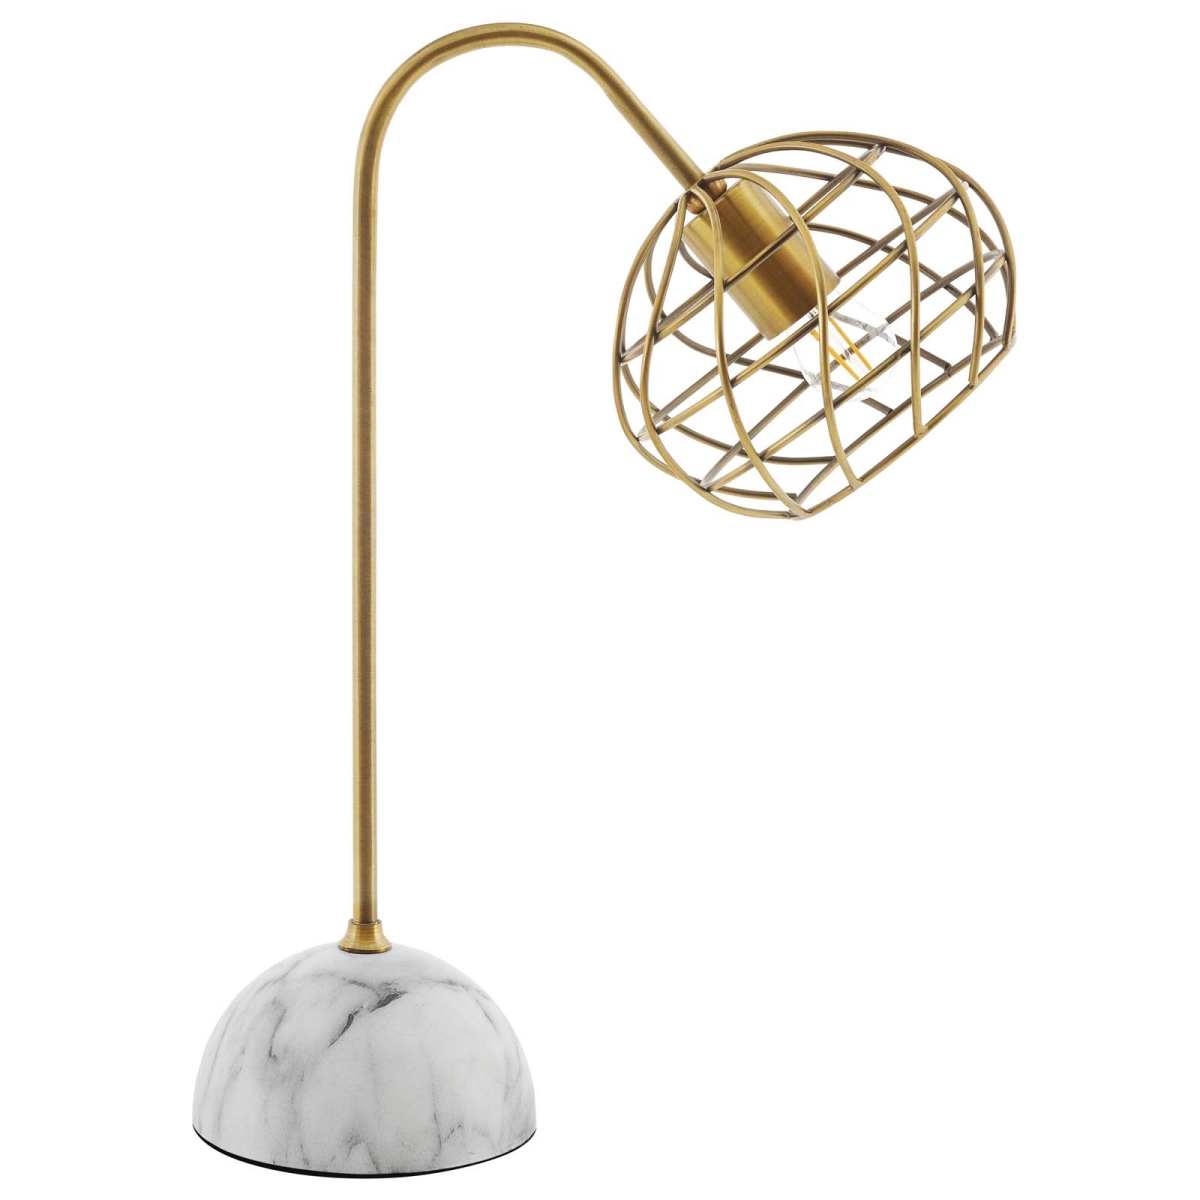 Eei-3086 Salient Brass & Faux White Marble Table Lamp - 20 X 15 X 6 In.